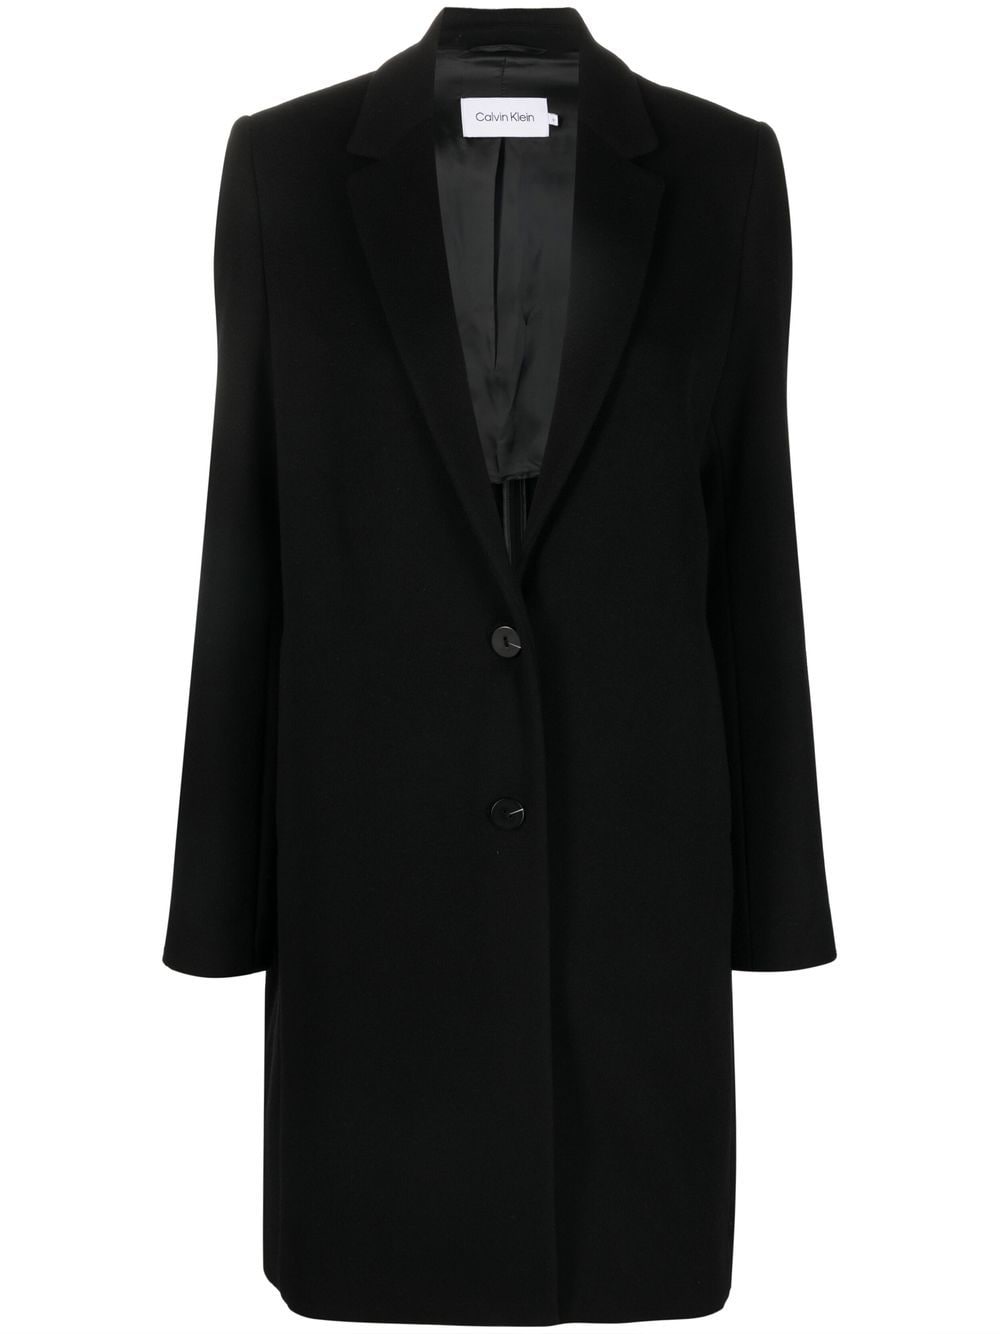 Image 1 of Calvin Klein single-breasted coat